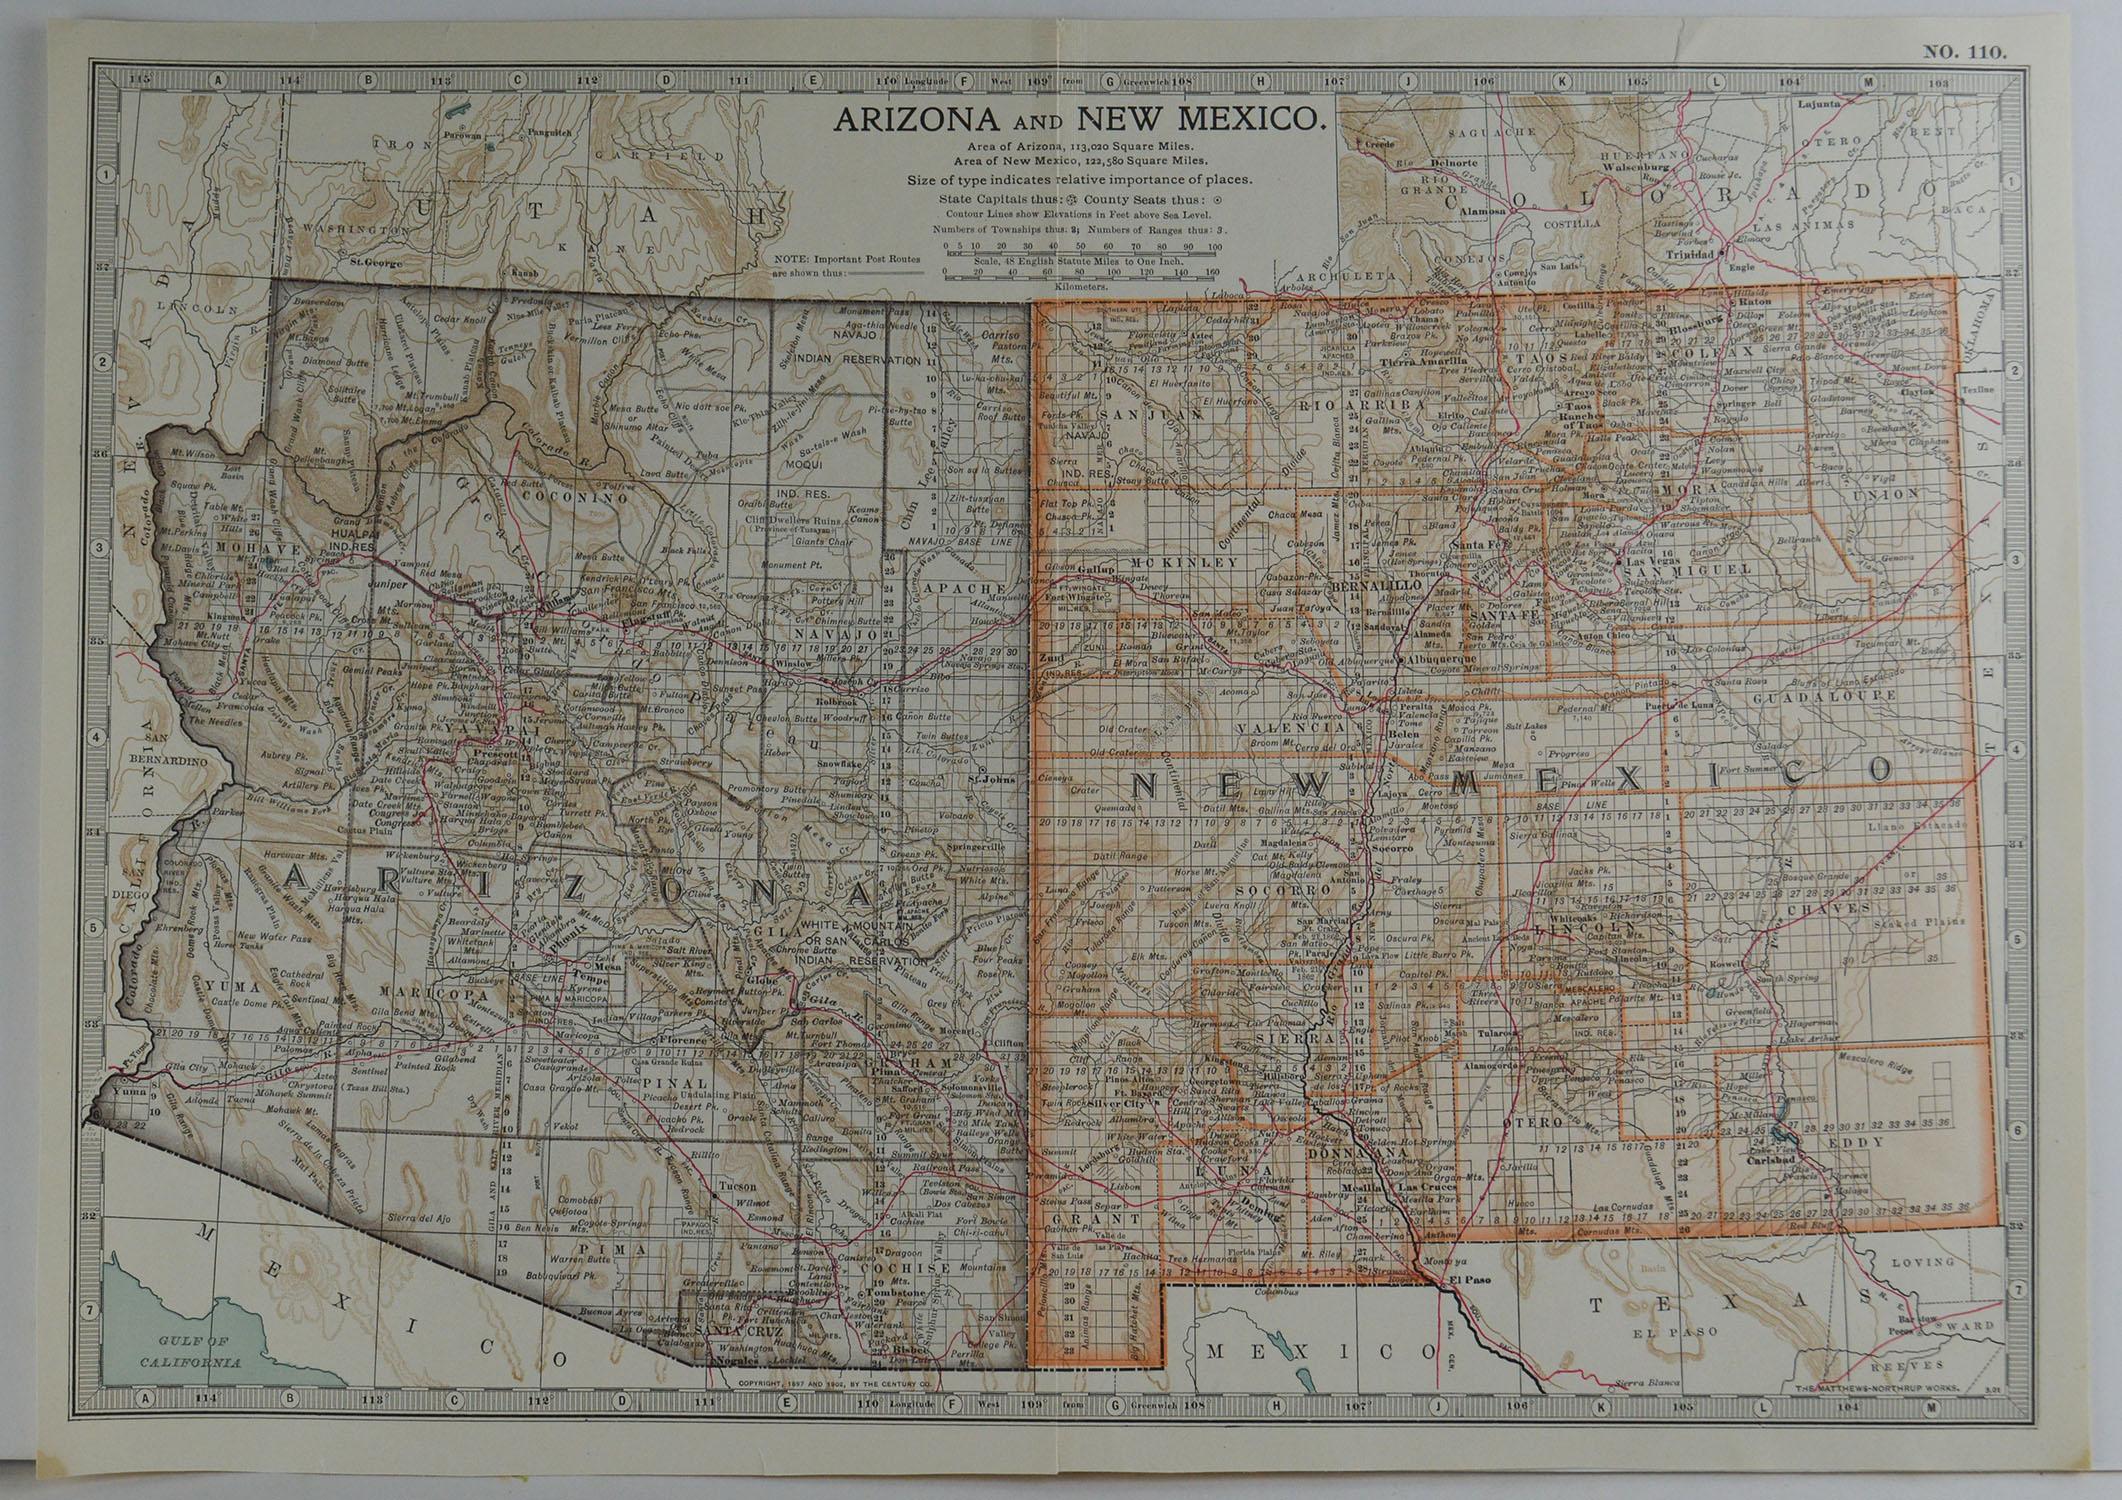 Great map of Arizona & New Mexico

Original color.

Published, circa 1890

Unframed.

One minor edge tear
  